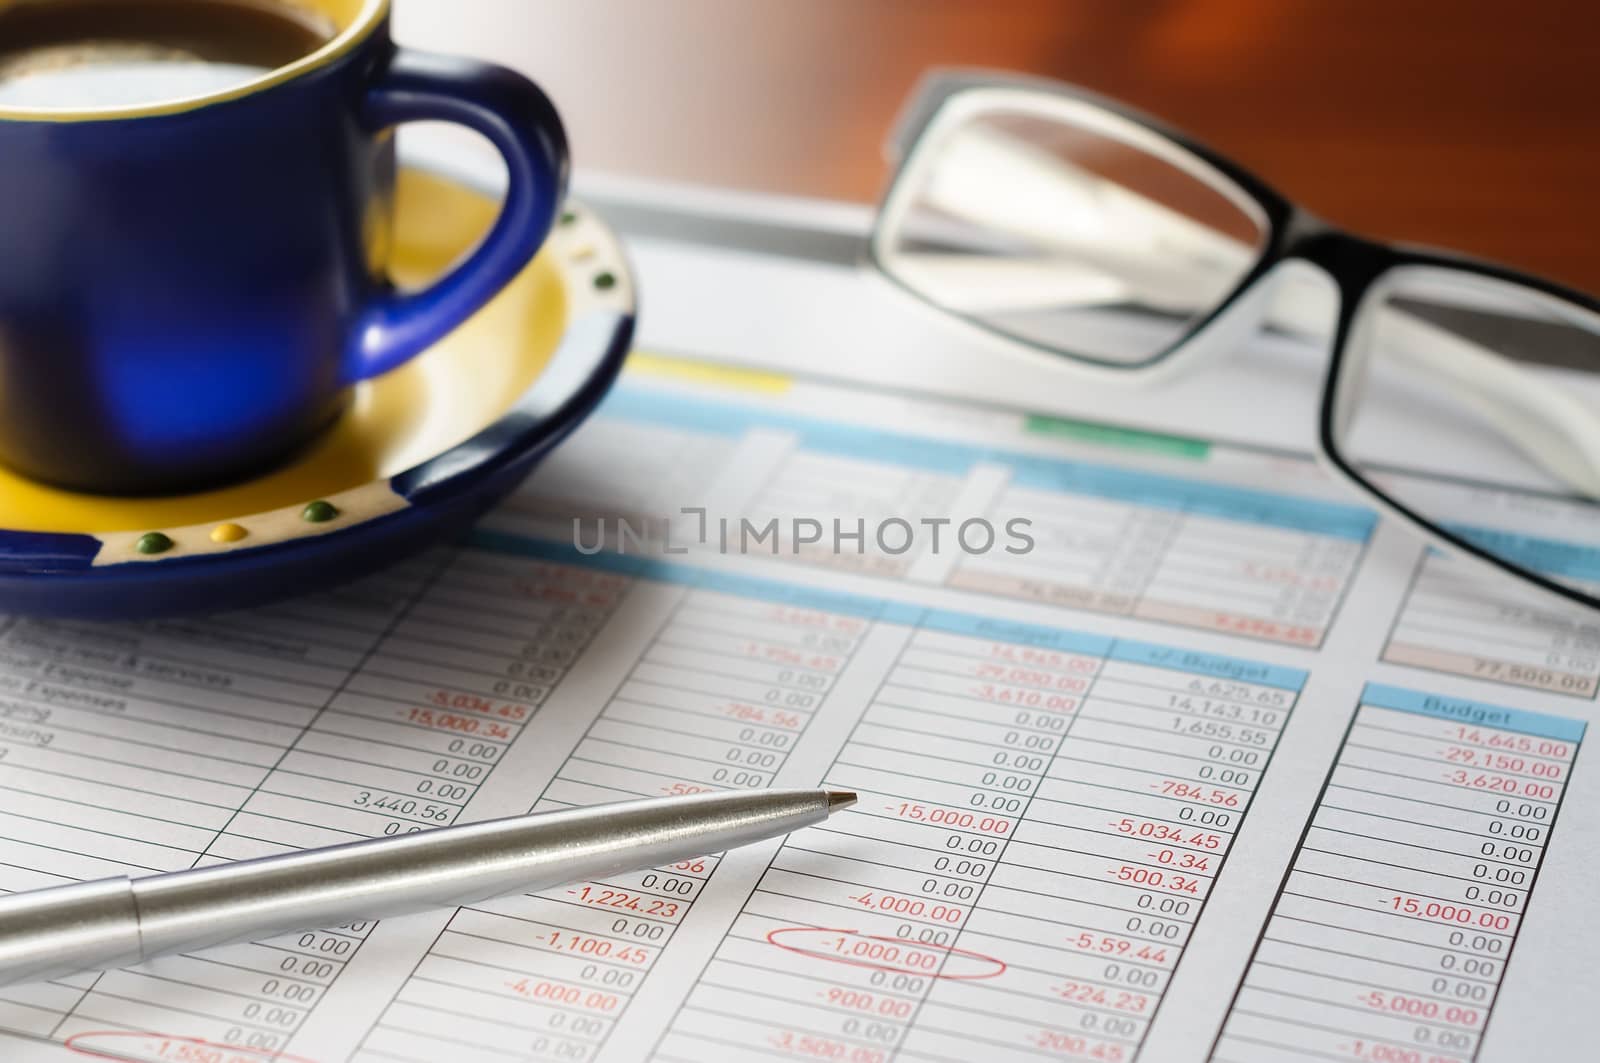 Accounting form with pen, in the businessman's office, close to a cup of coffee